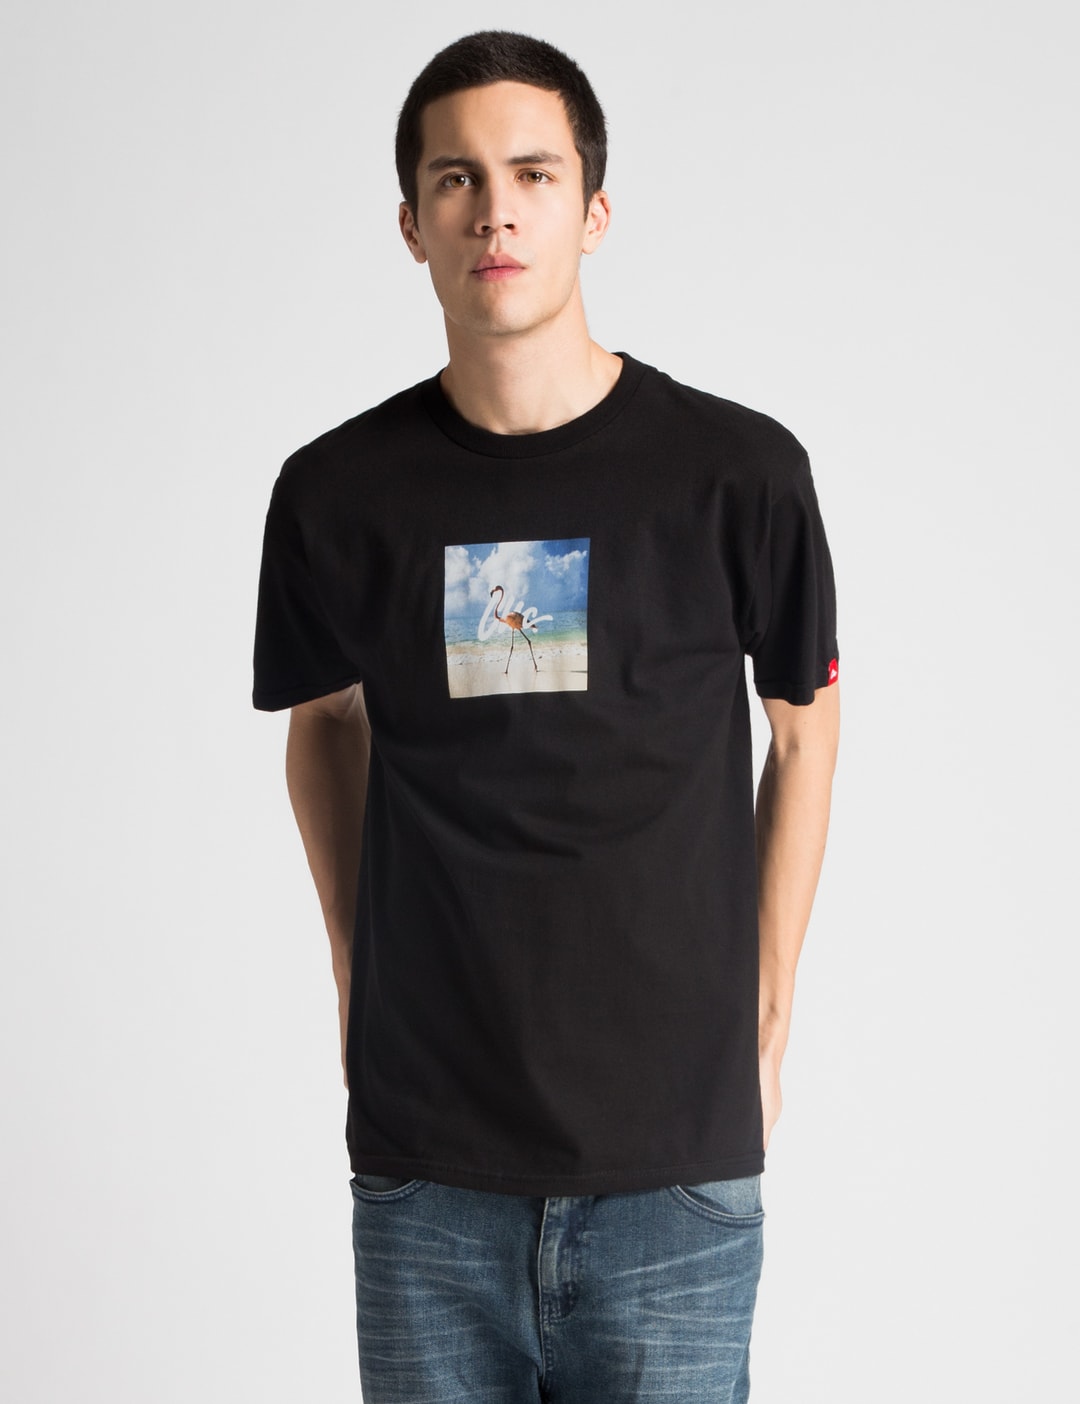 Clsc - Black Flamingo T-Shirt | HBX - Globally Curated Fashion and ...